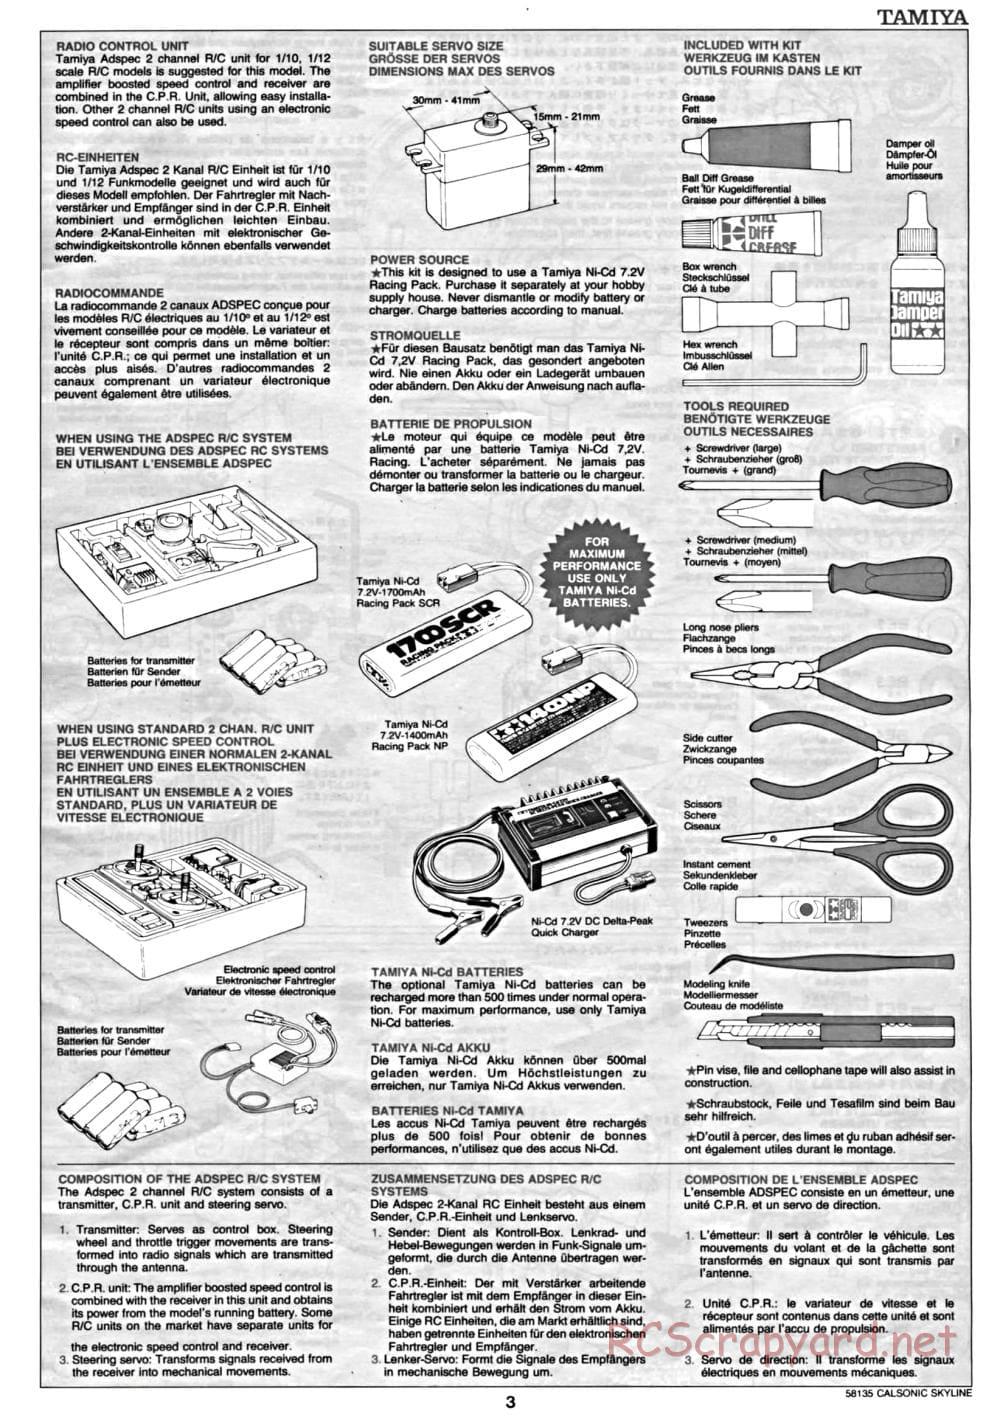 Tamiya - Calsonic Skyline GT-R Gr.A - TA-02 Chassis - Manual - Page 3